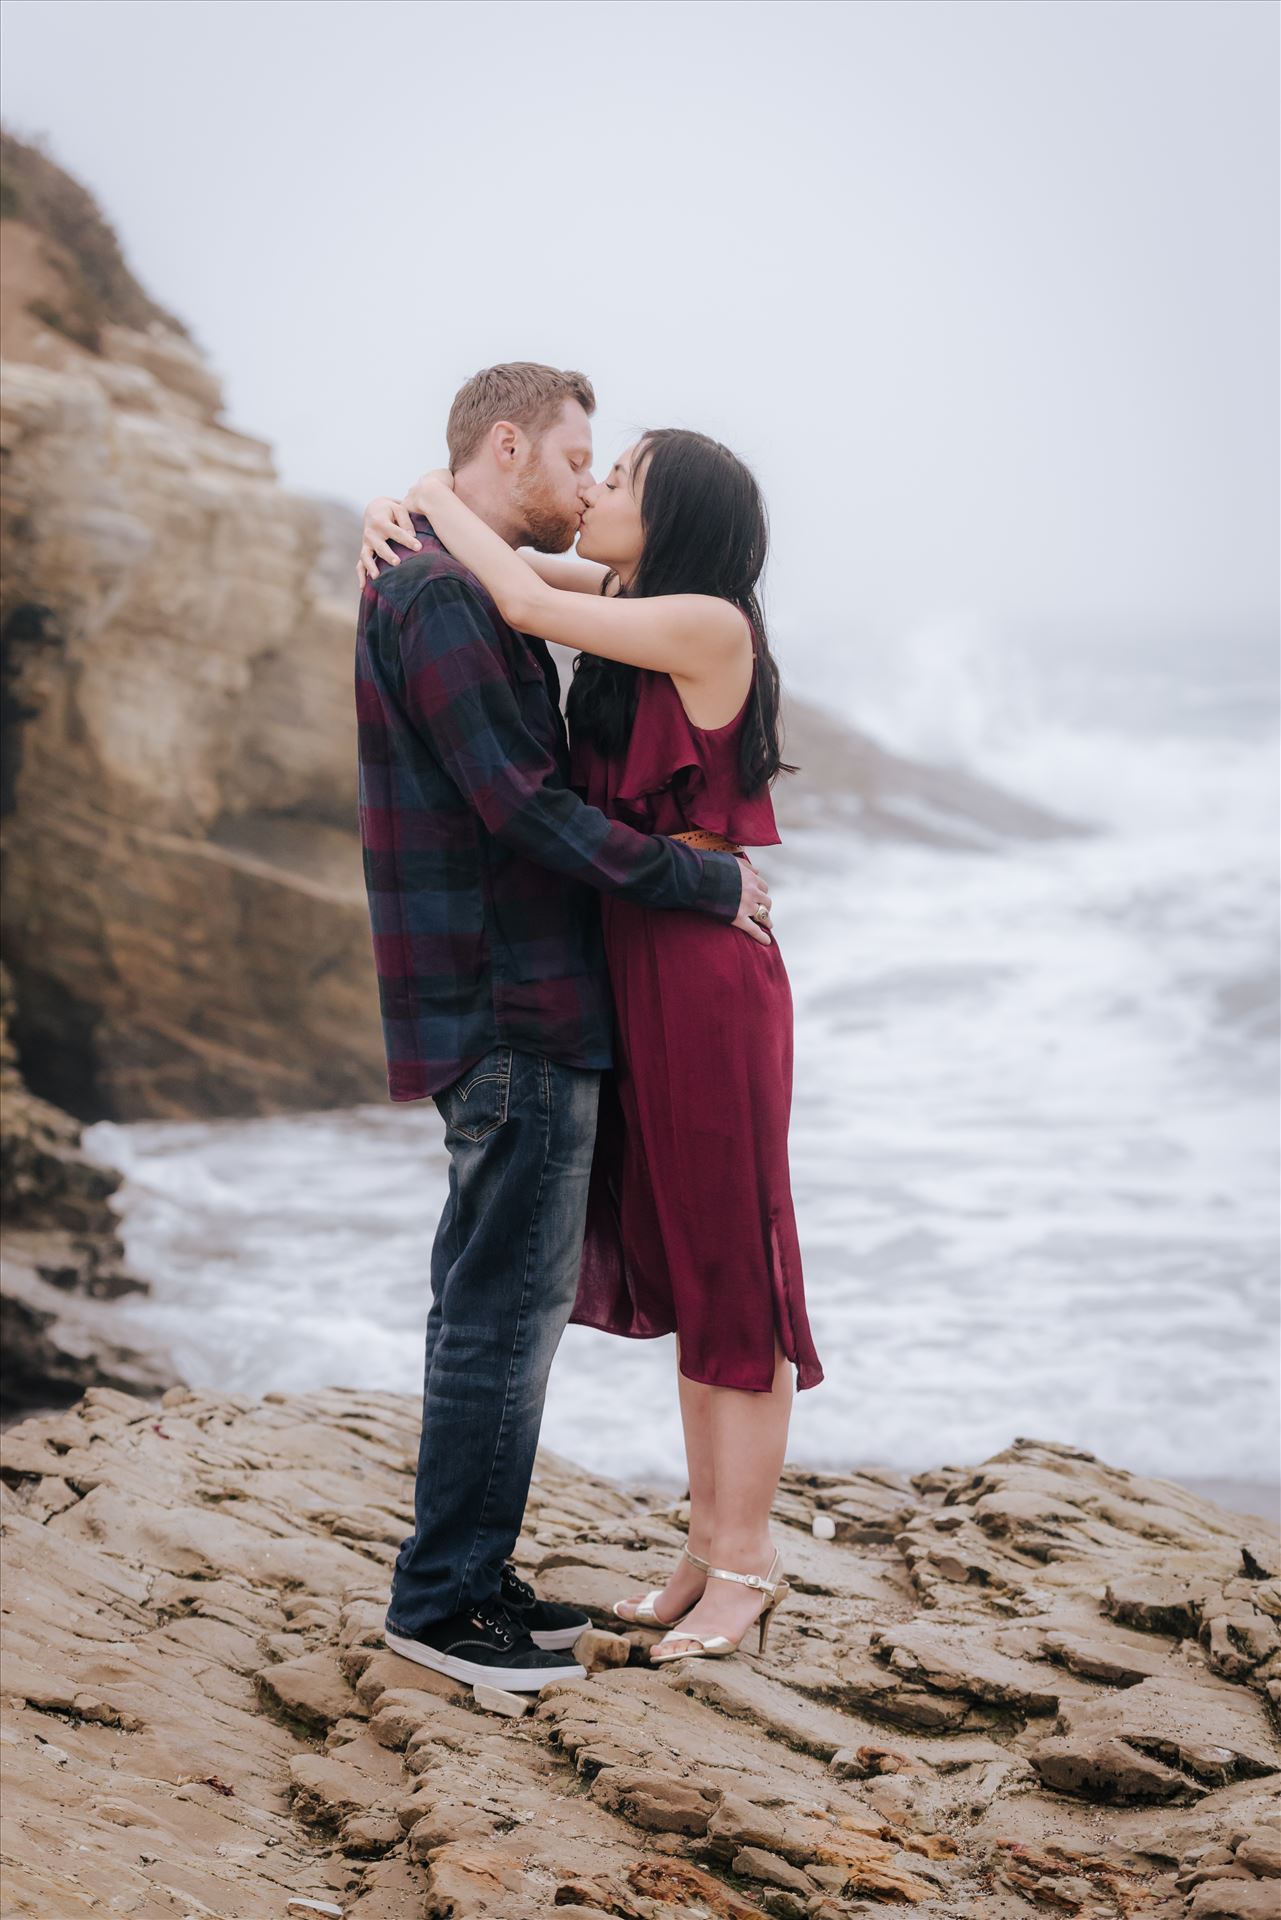 Carmen and Josh 12 Montana de Oro Spooners Cove Engagement Photography Los Osos California.  Kiss on the nose by Sarah Williams